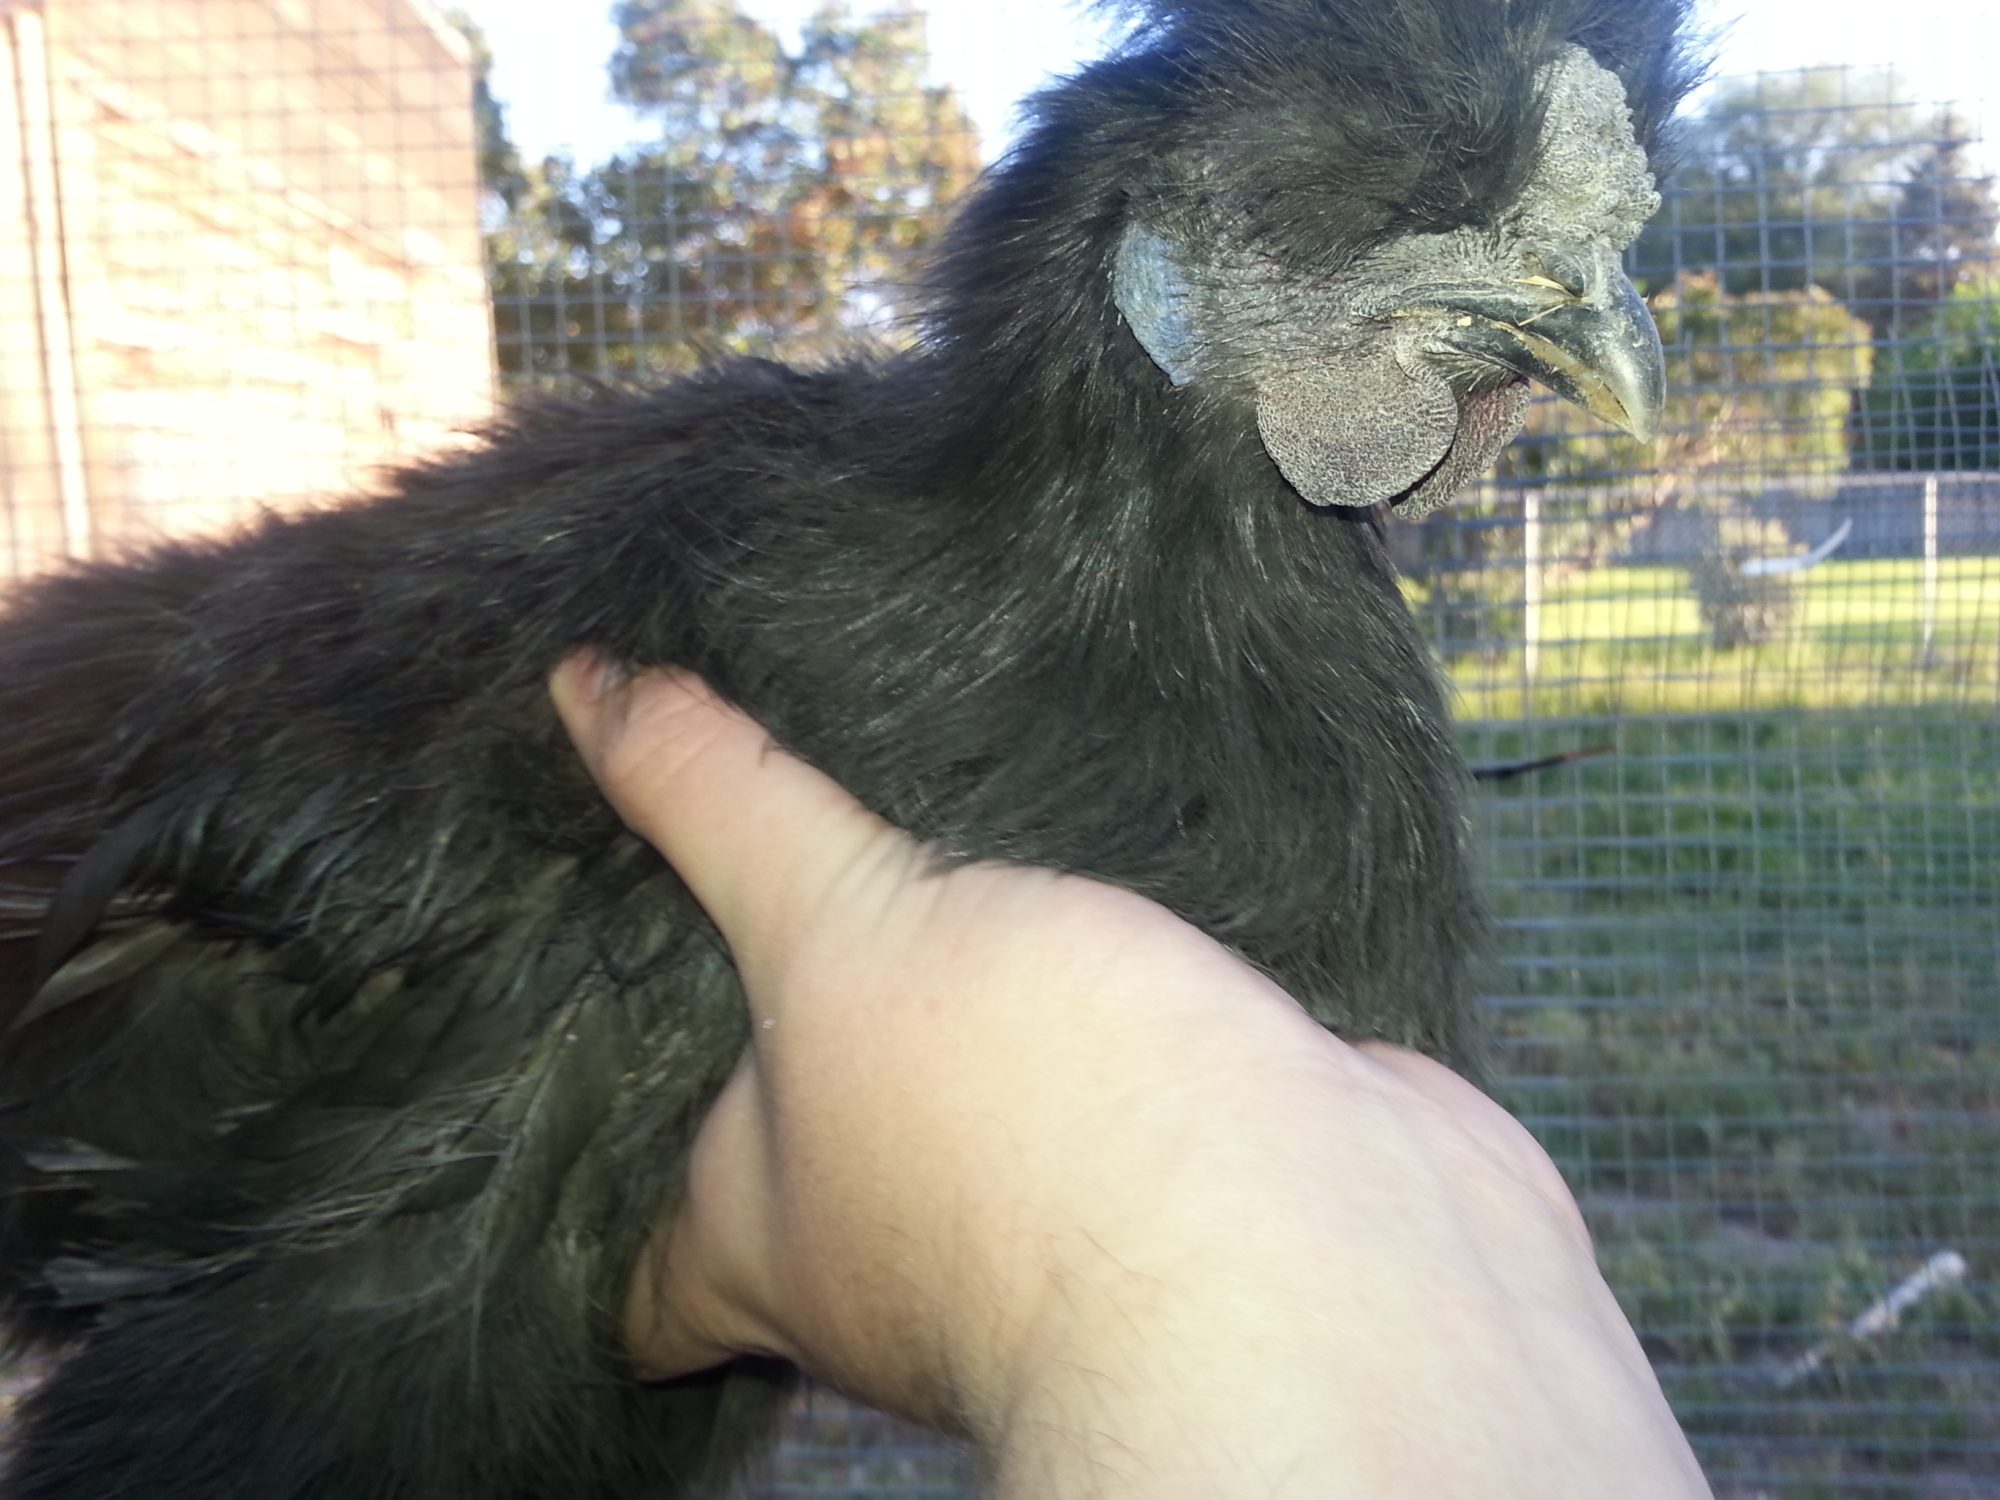 Belle although hes a boy haha black silkie